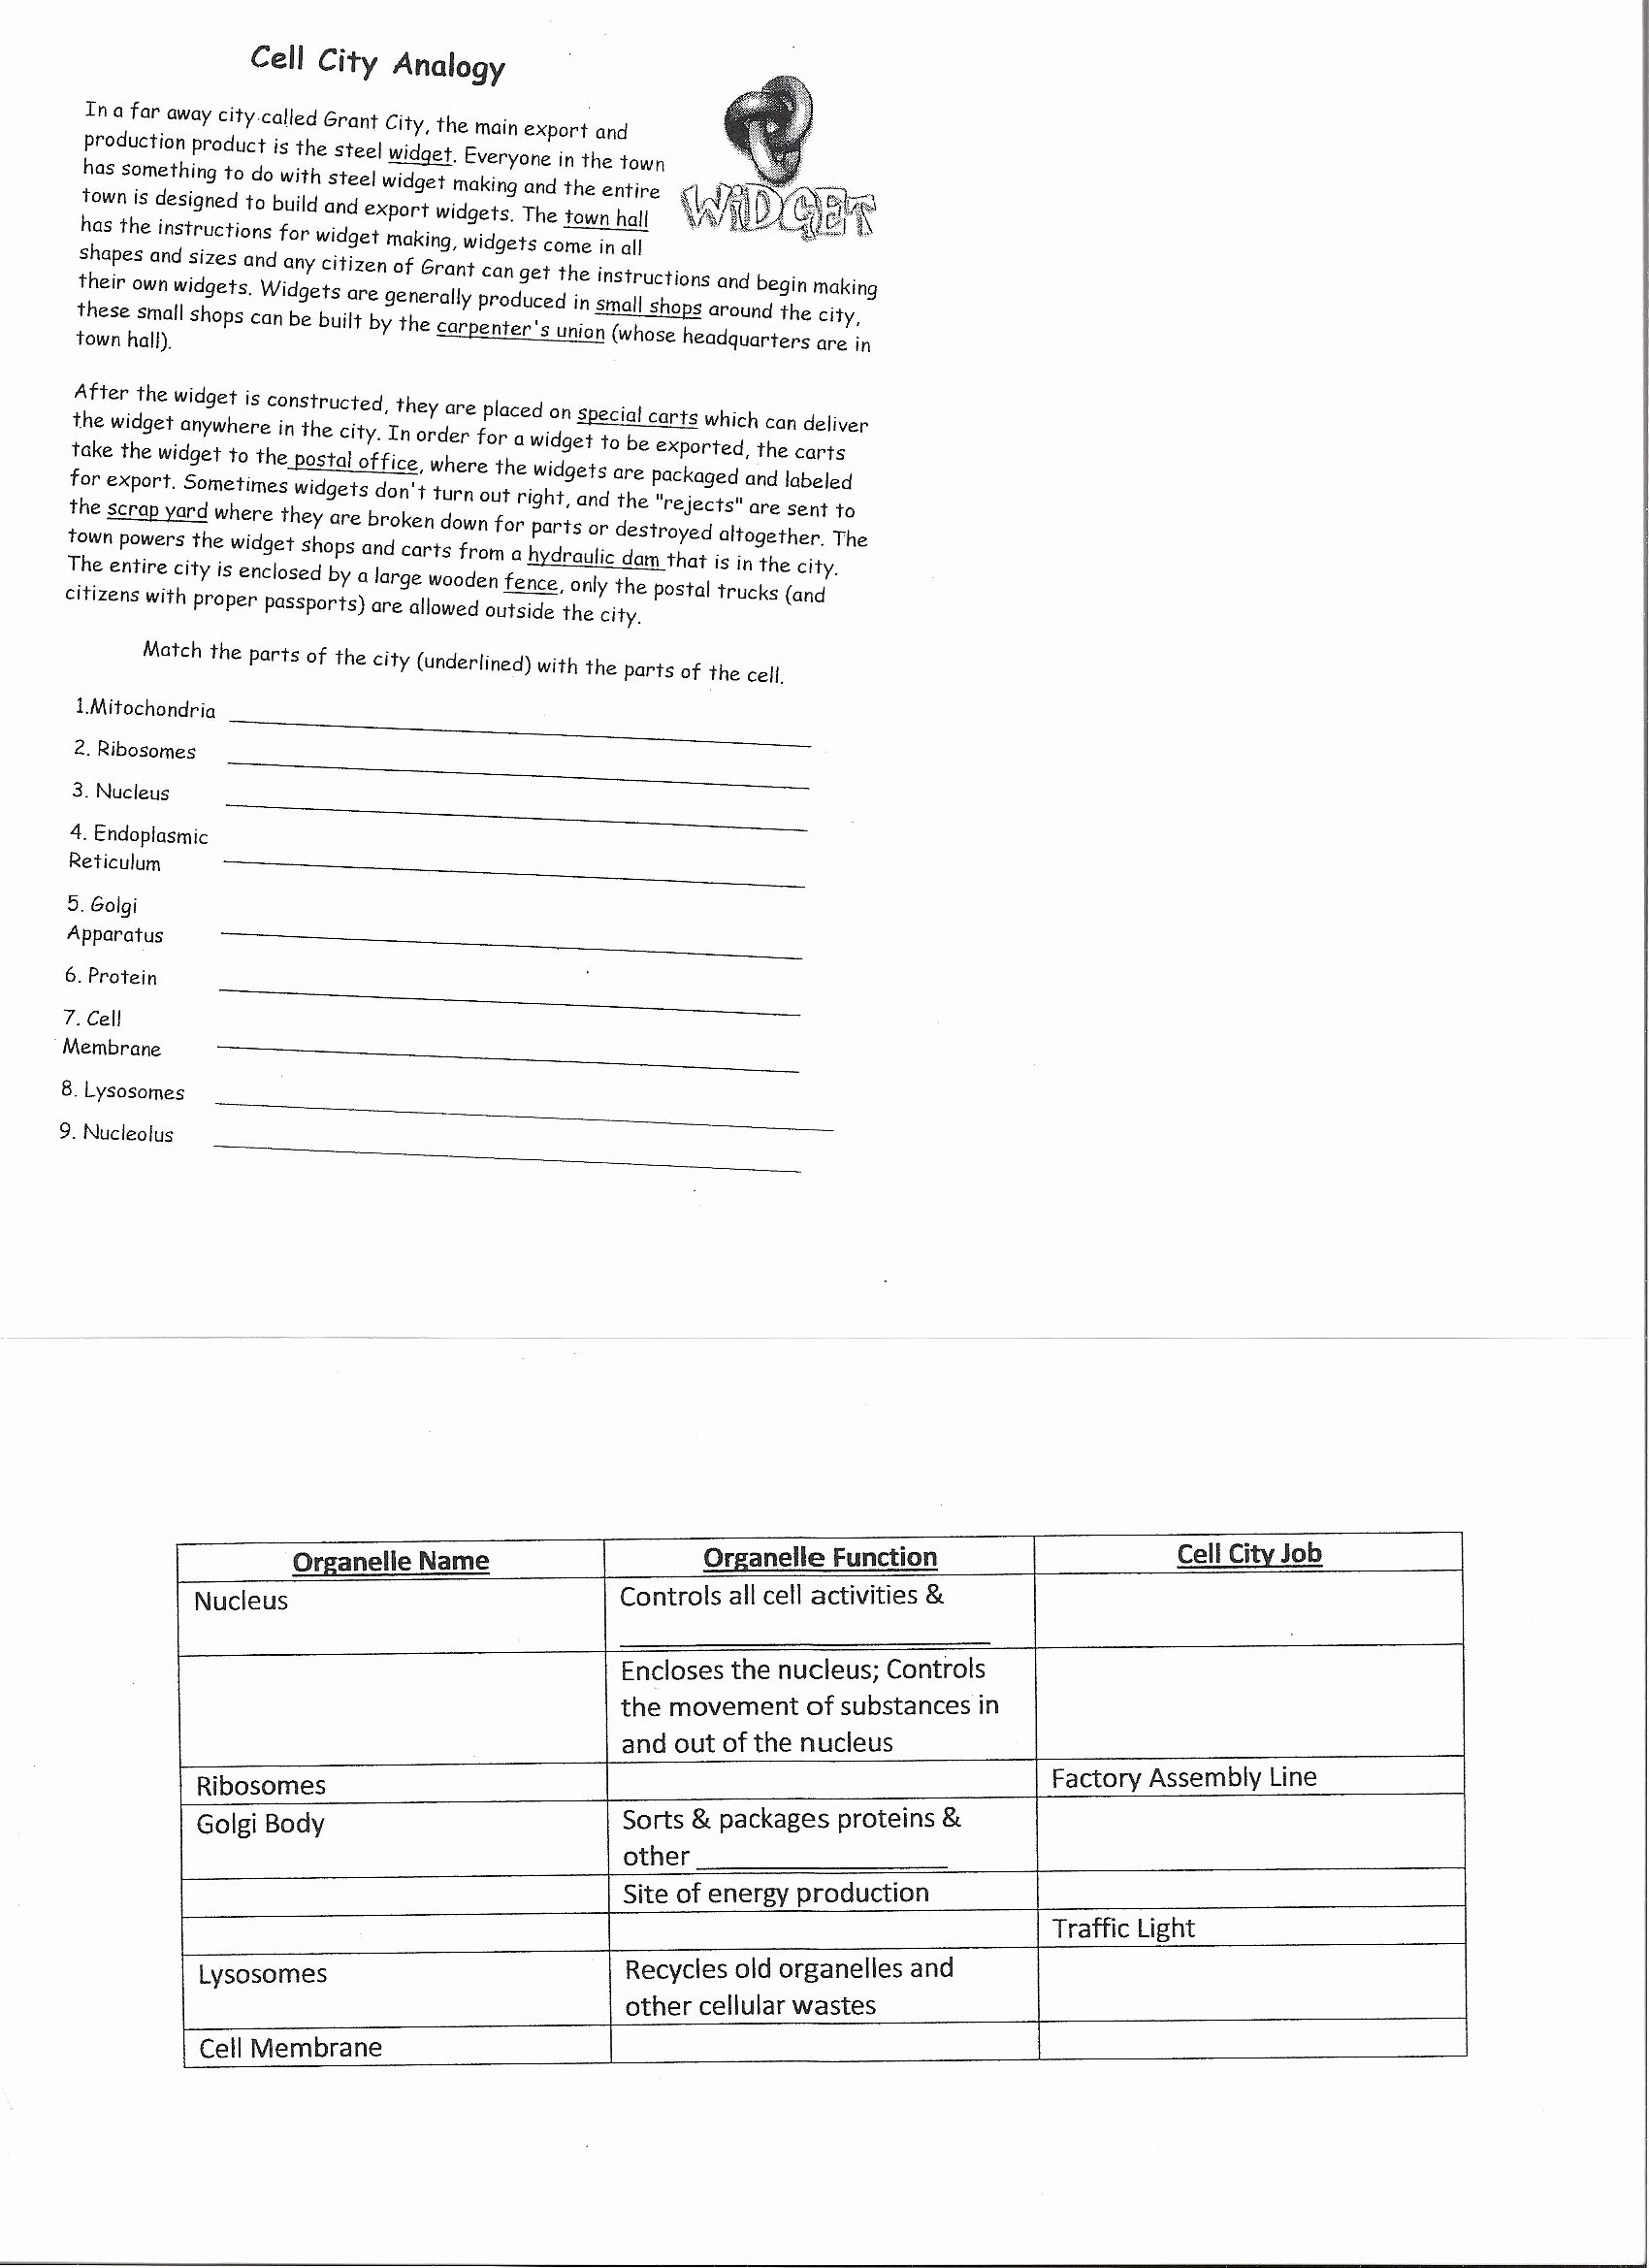 Cell City Analogy Worksheet New Cell City Analogy Chart the Best Worksheets Image